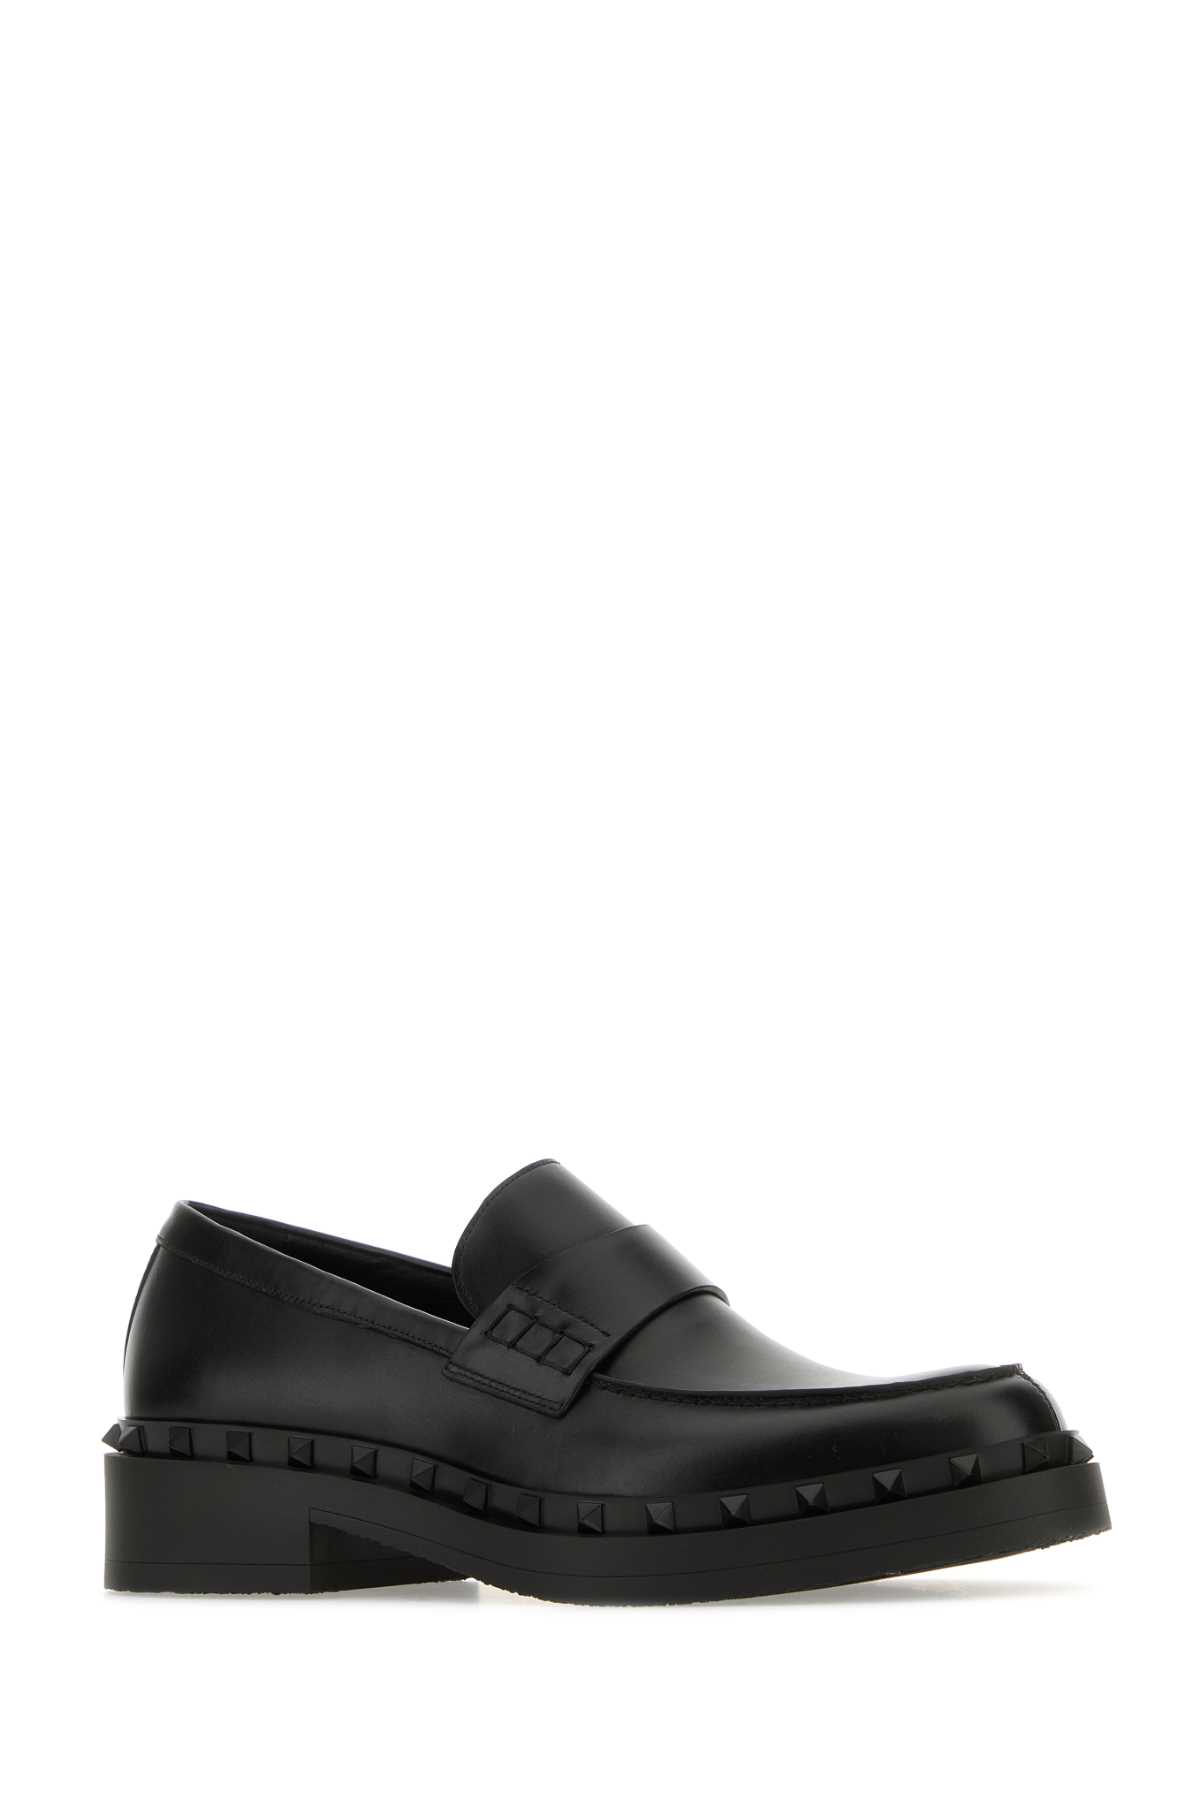 Shop Valentino Black Leather Rockstud Loafers In Nero